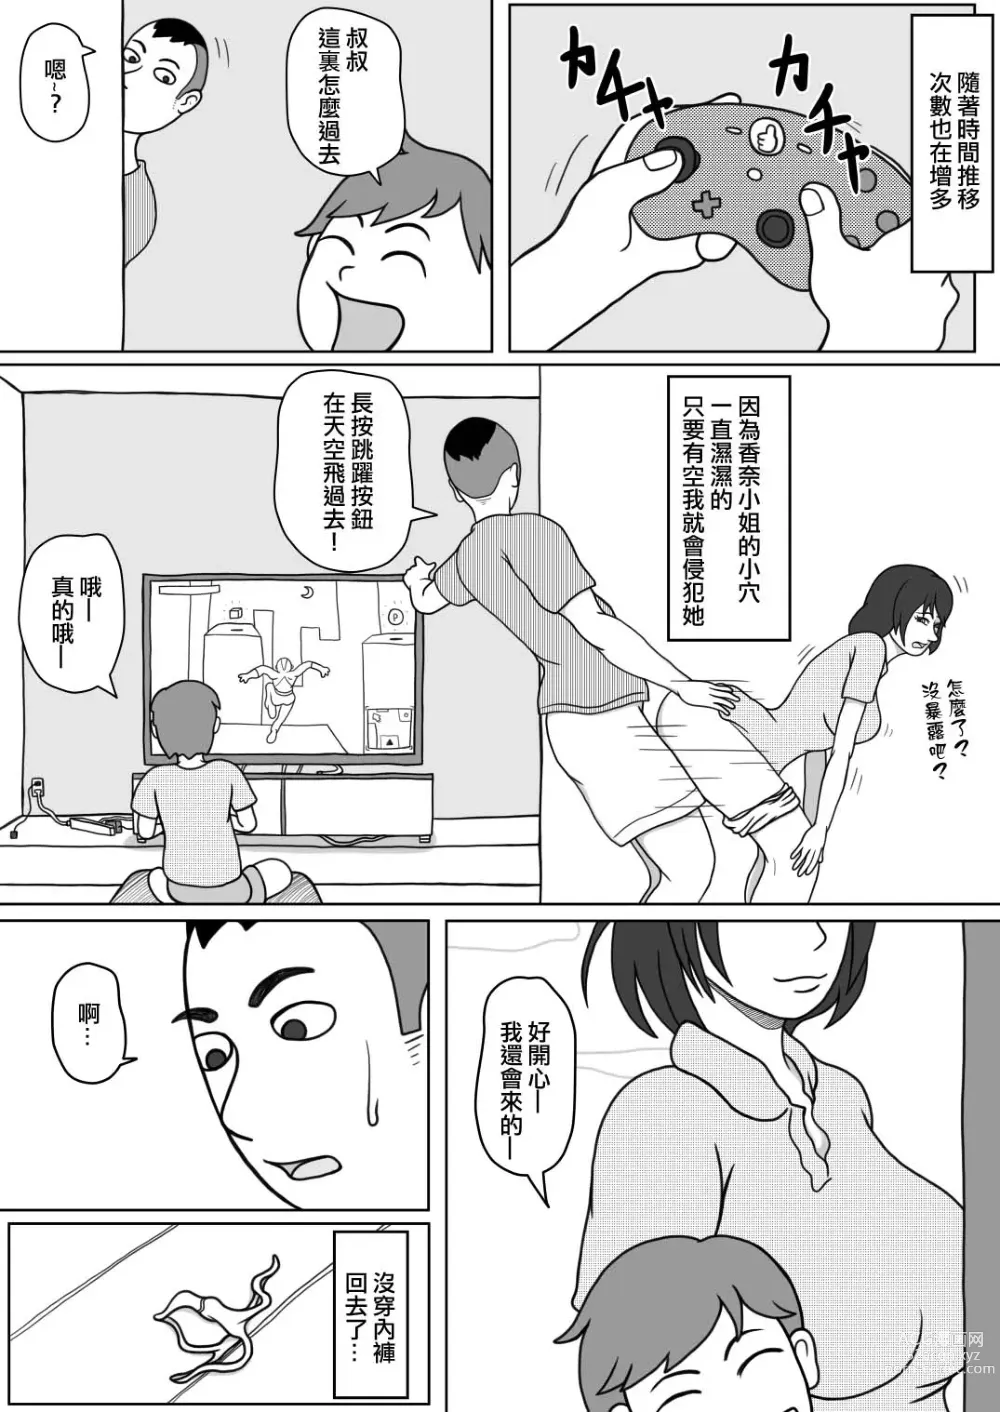 Page 26 of doujinshi 201號房的鄰居